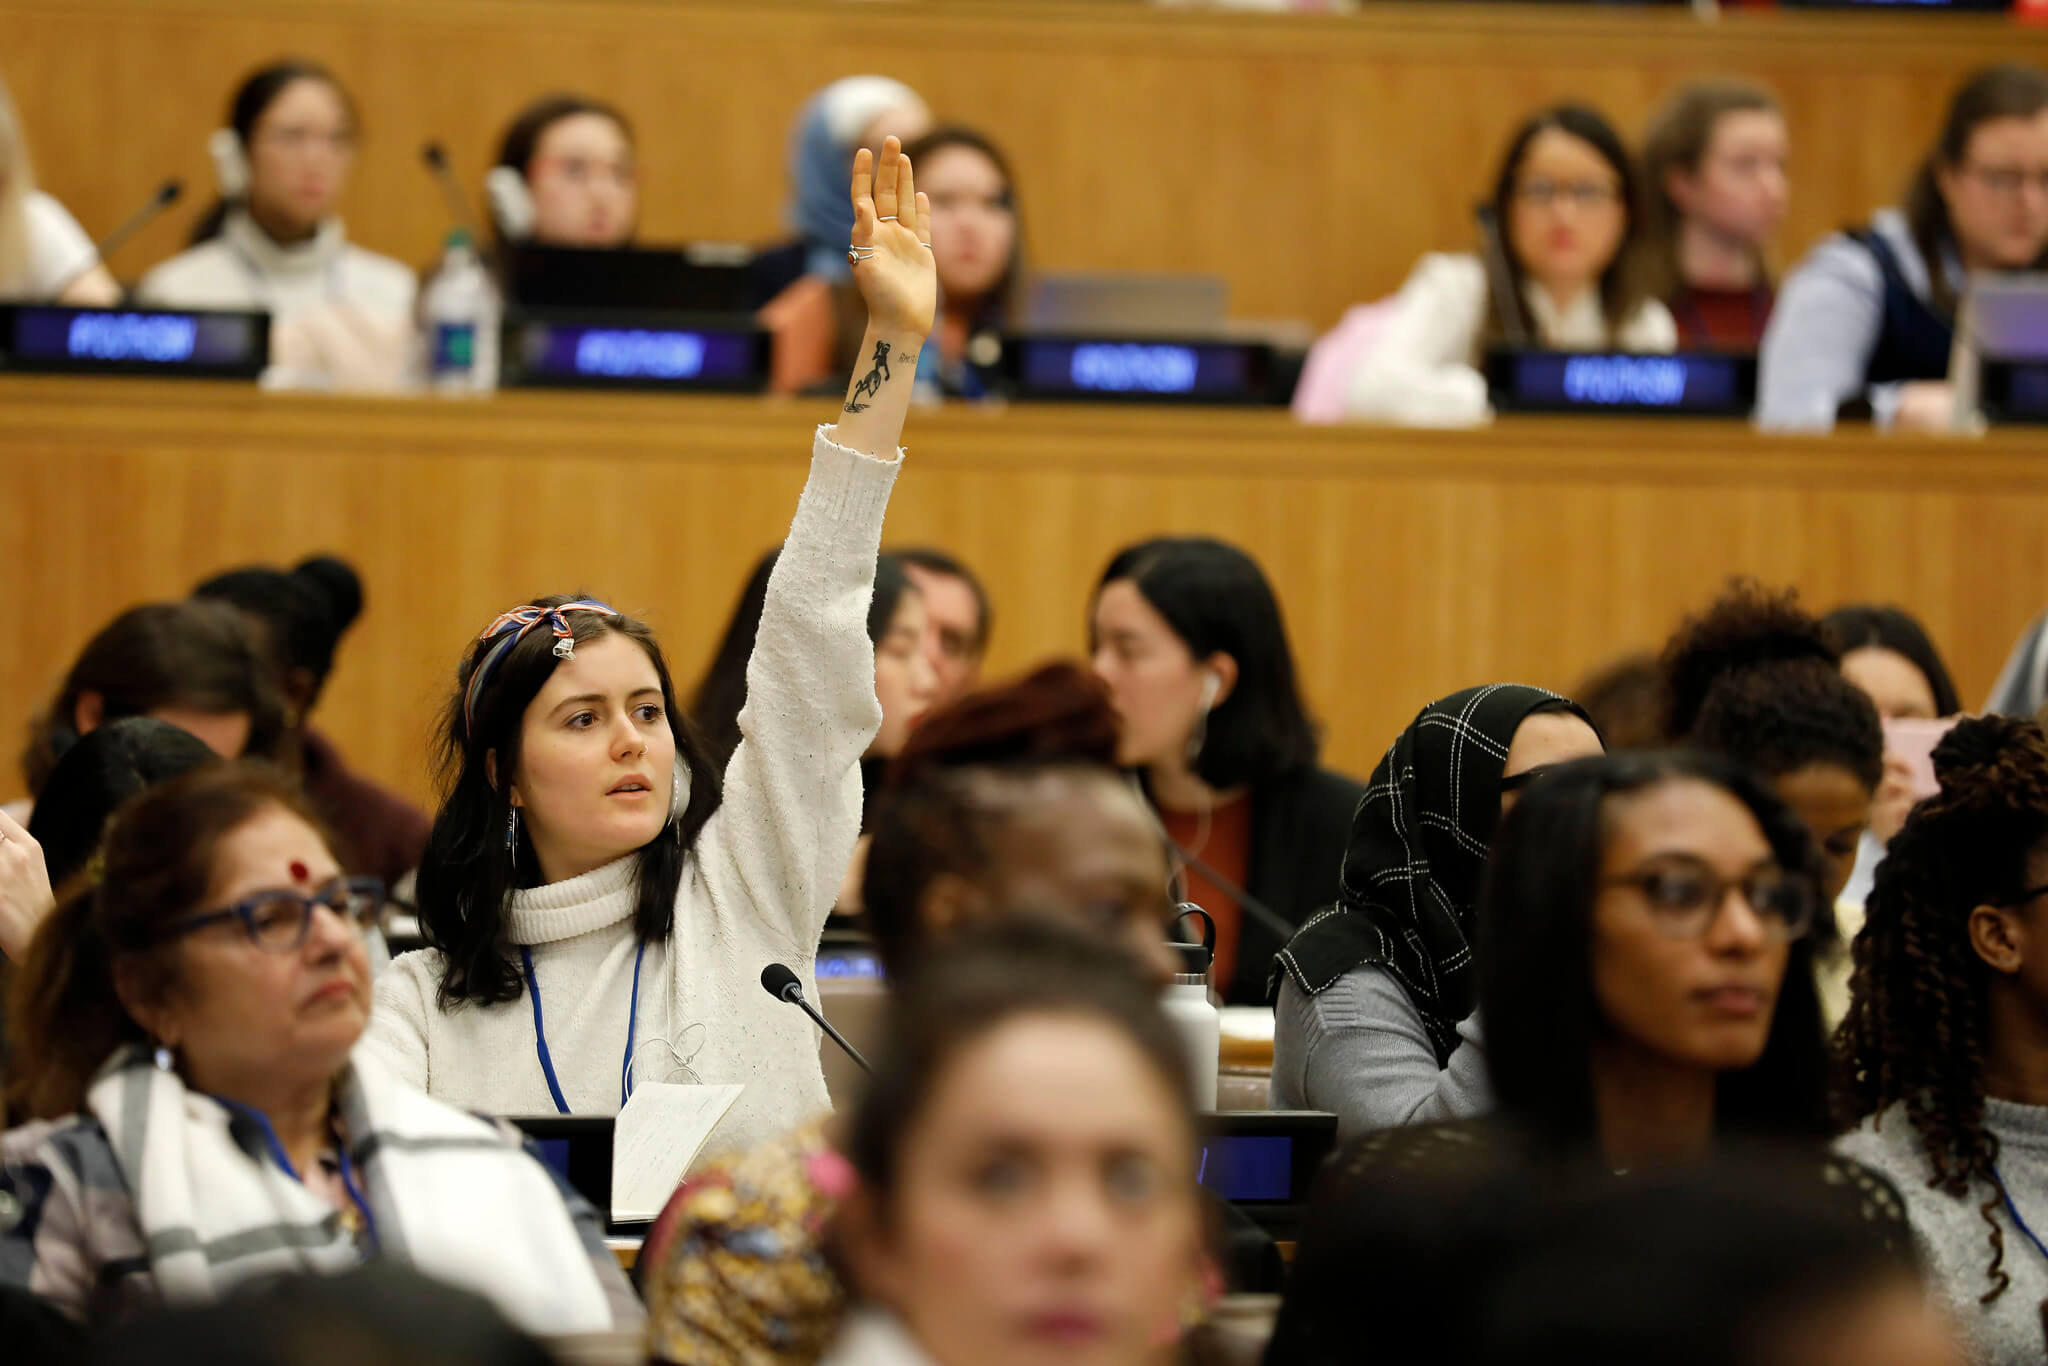 The 63rd Session of the Commission on the Status of Women at the UN in 2019. © UN Women